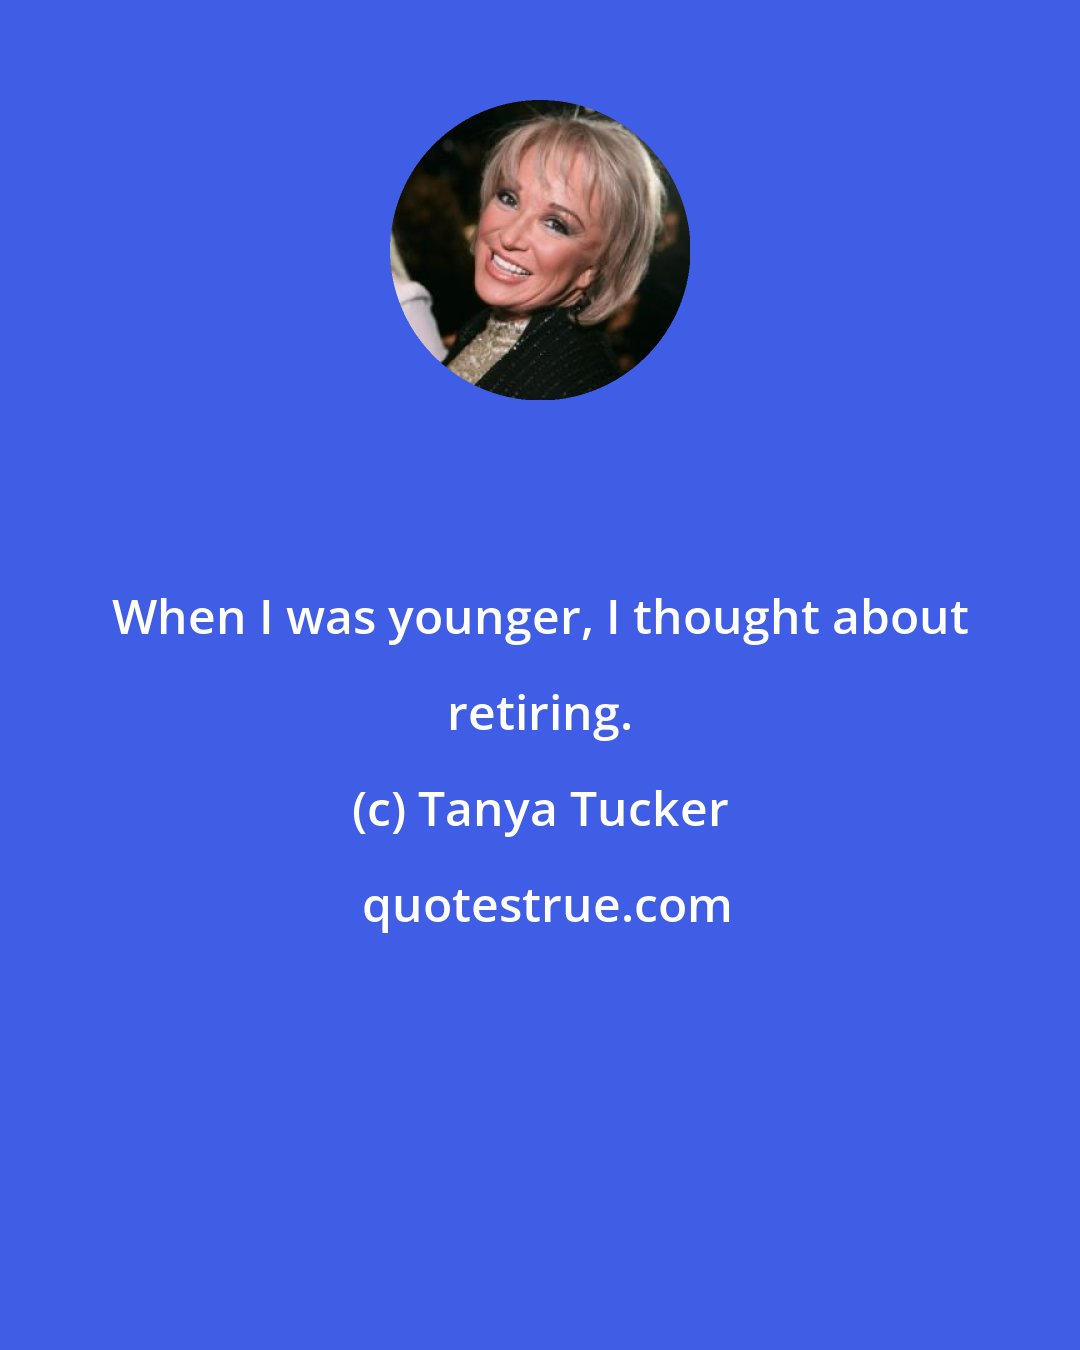 Tanya Tucker: When I was younger, I thought about retiring.